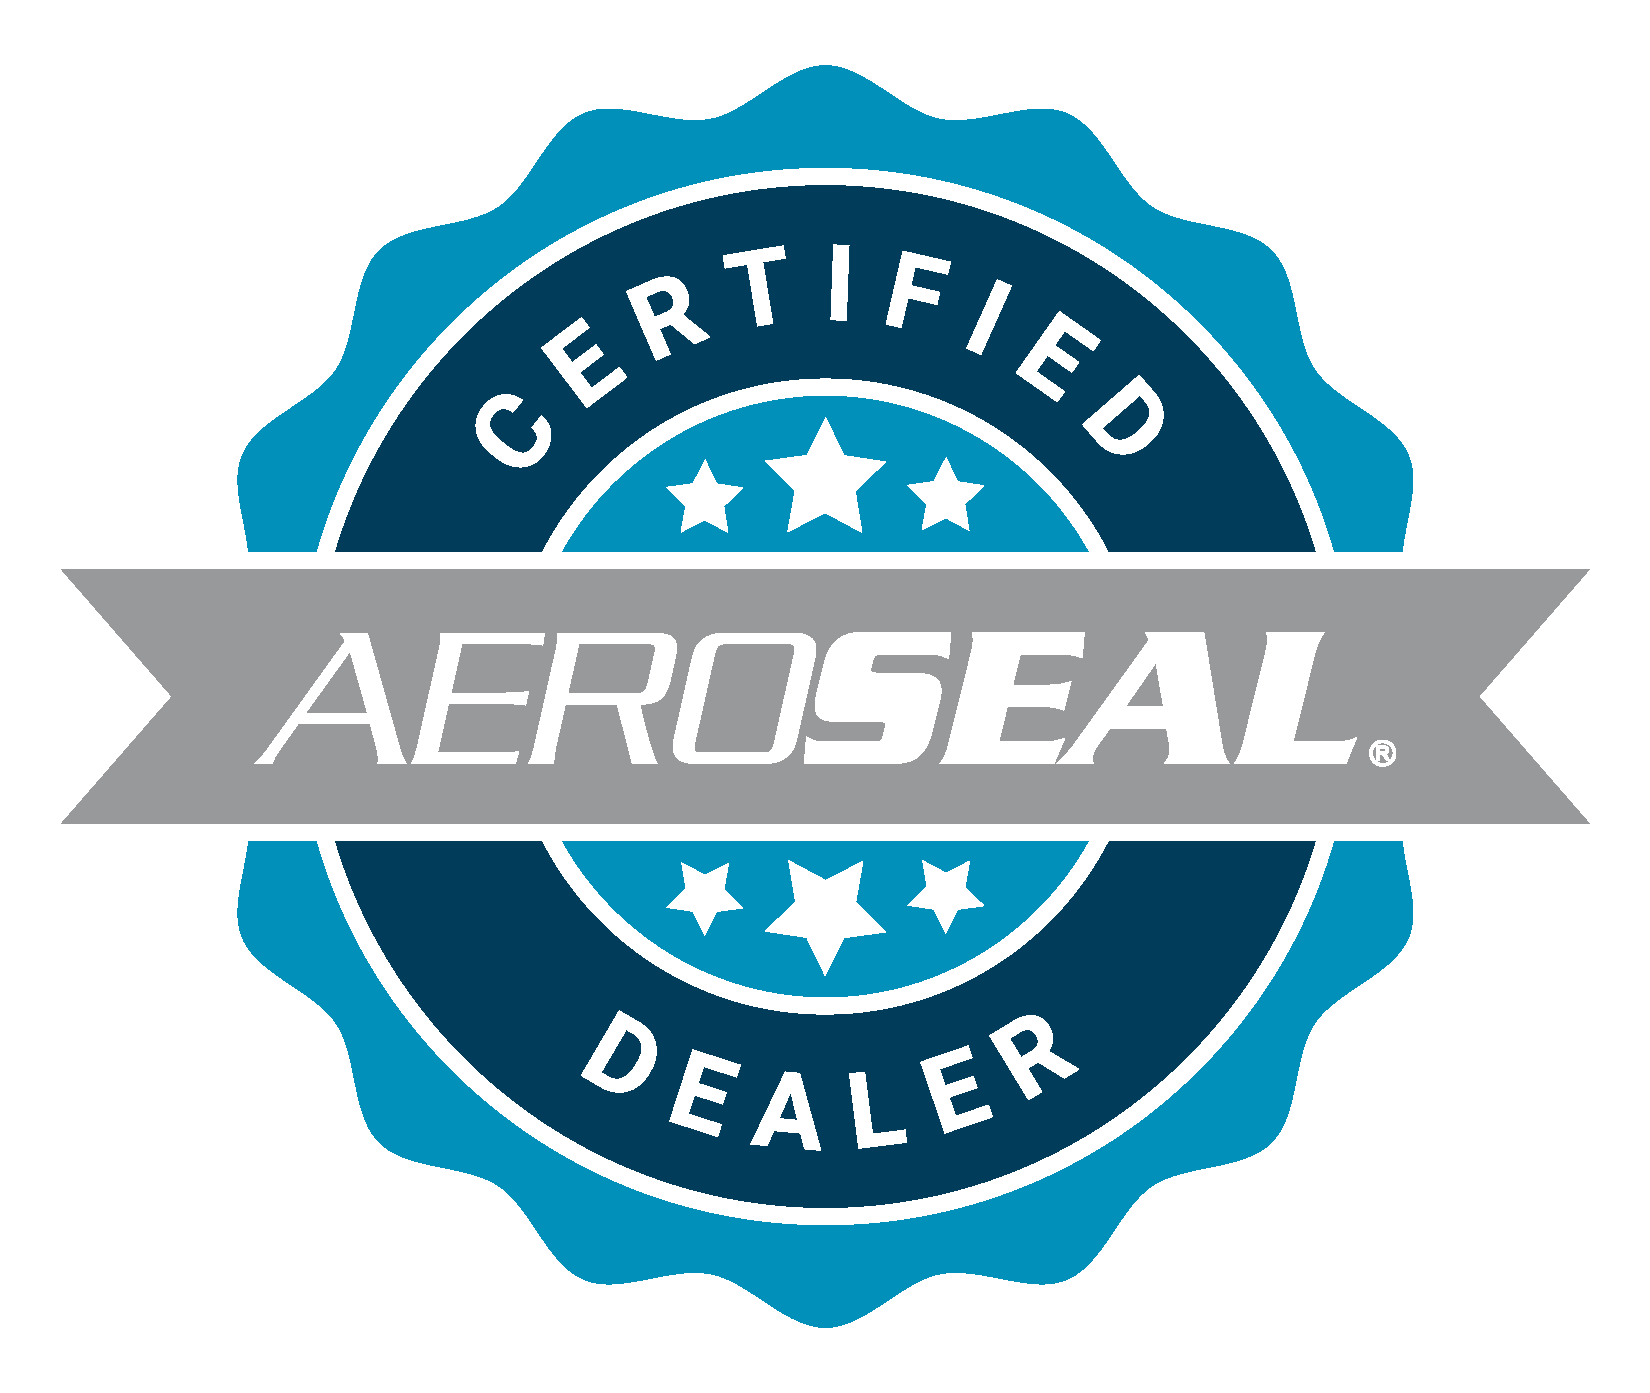 Aeroseal certified dealer logo featuring the word 'aeroseal' in bold letters with a seal symbol in the background.